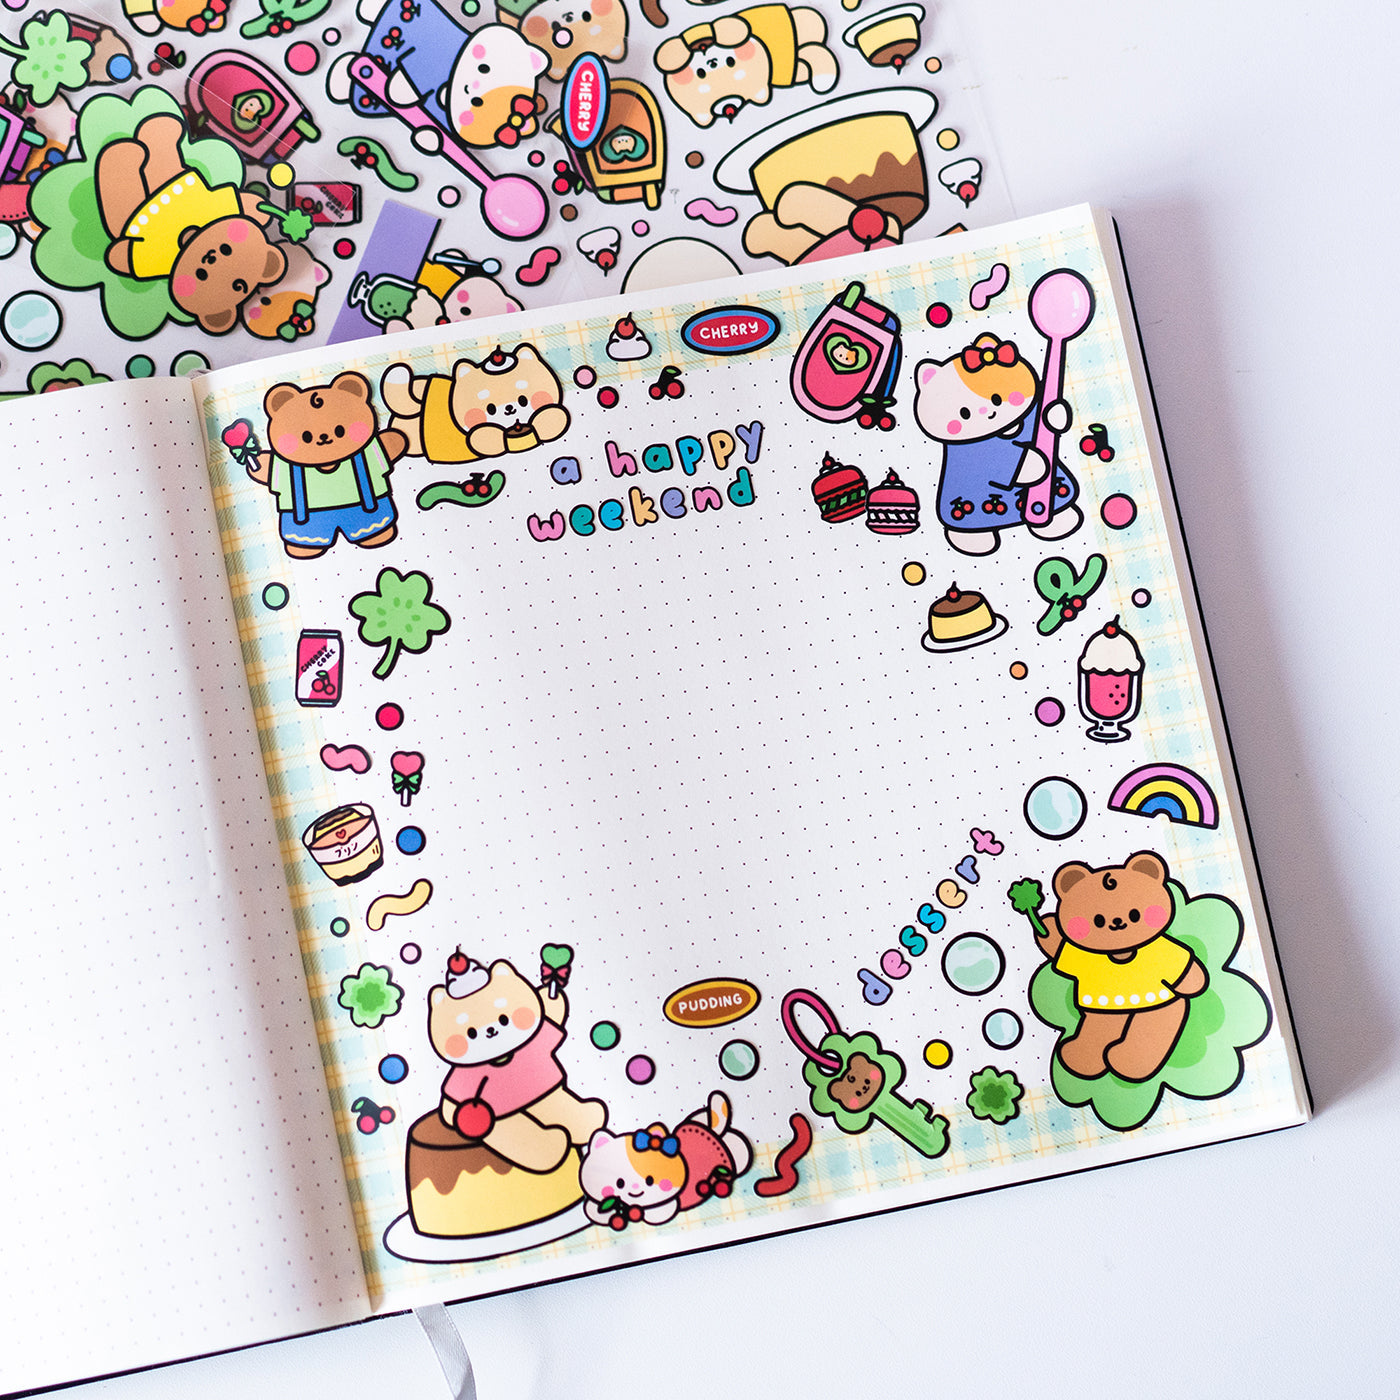 Outlined Space Nyan and Cherry Matte Journal Sticker Sheet